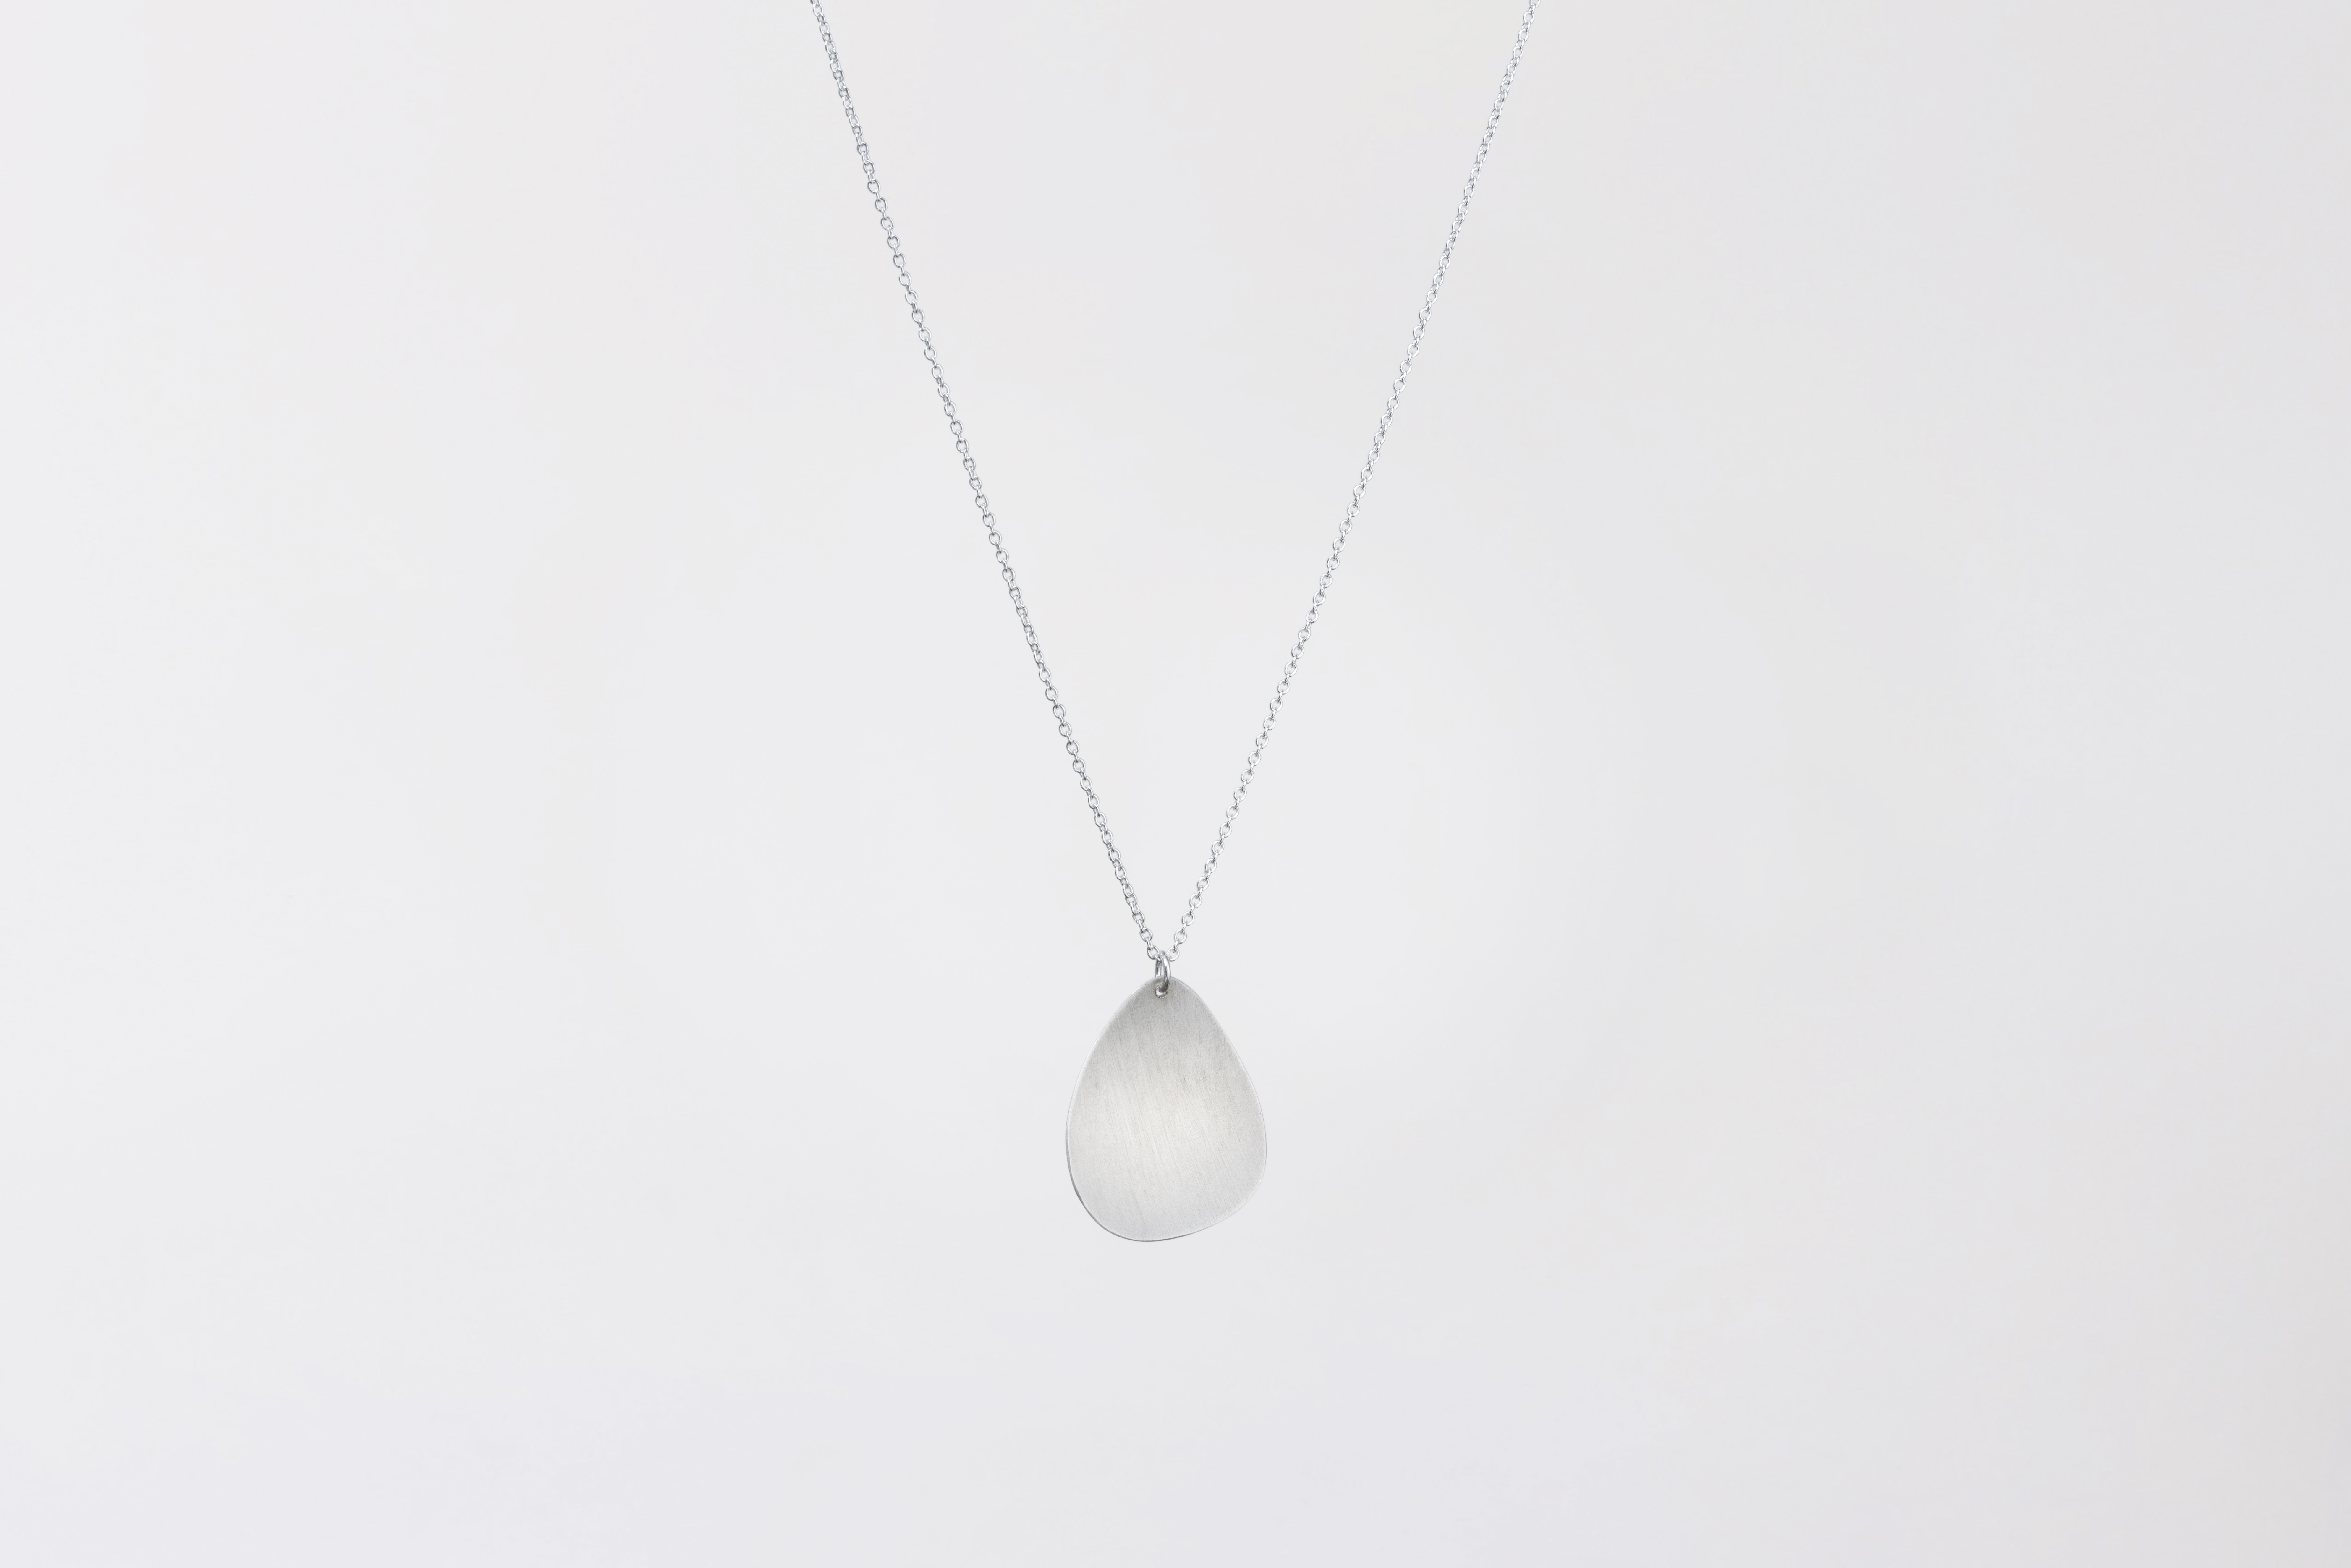 Sustainable ethical bridal Singö necklace in matte recycled silver